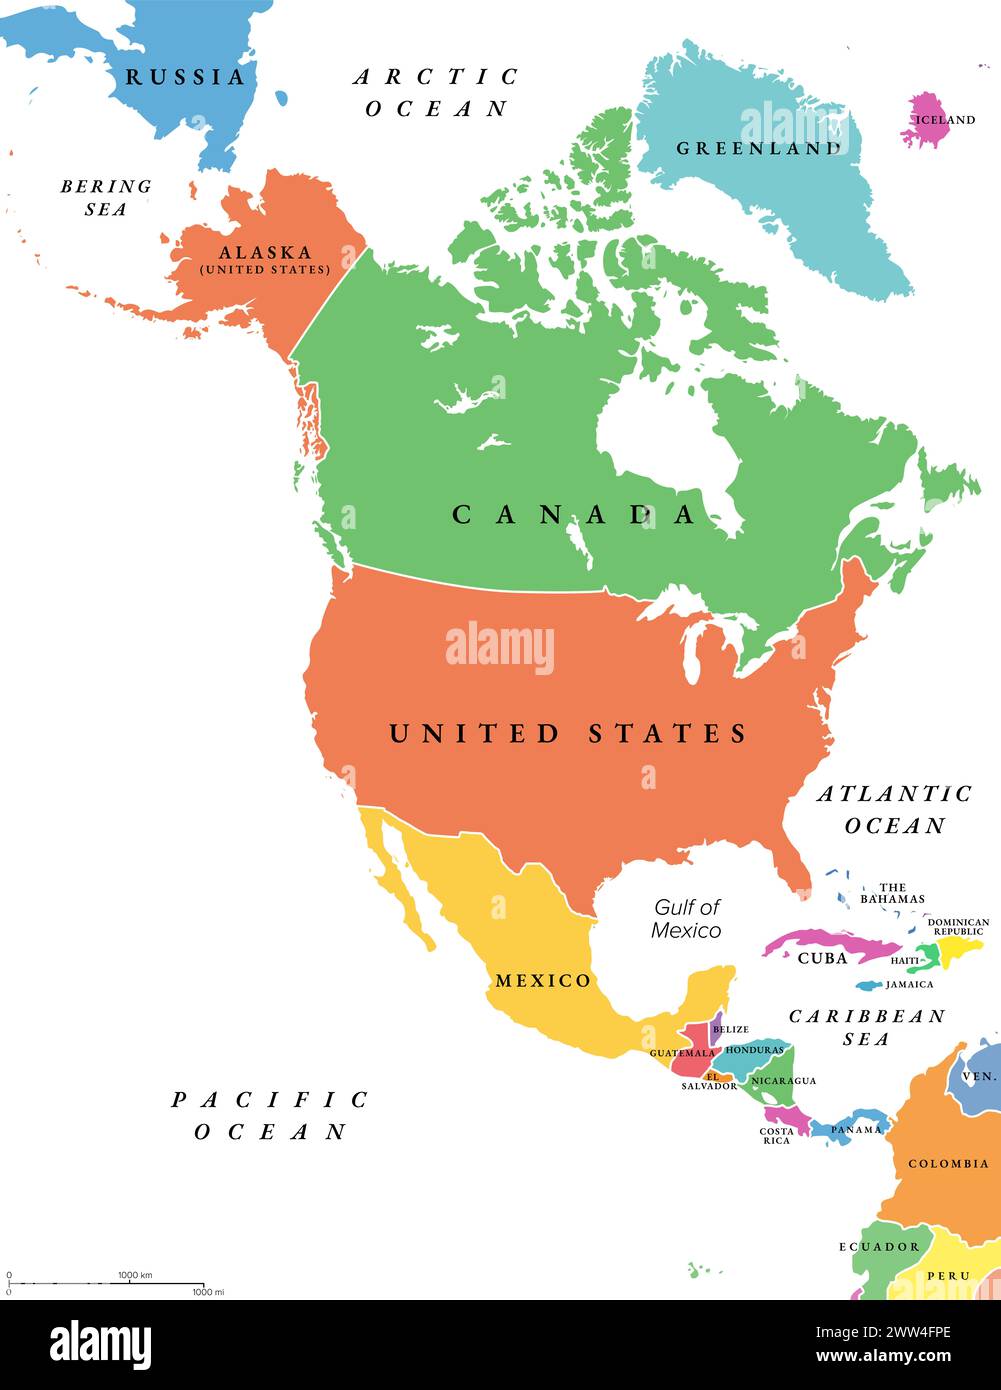 North America countries, political map. Continent bordered by South America, Caribbean Sea, and by Arctic, Atlantic and Pacific Ocean. Stock Photo